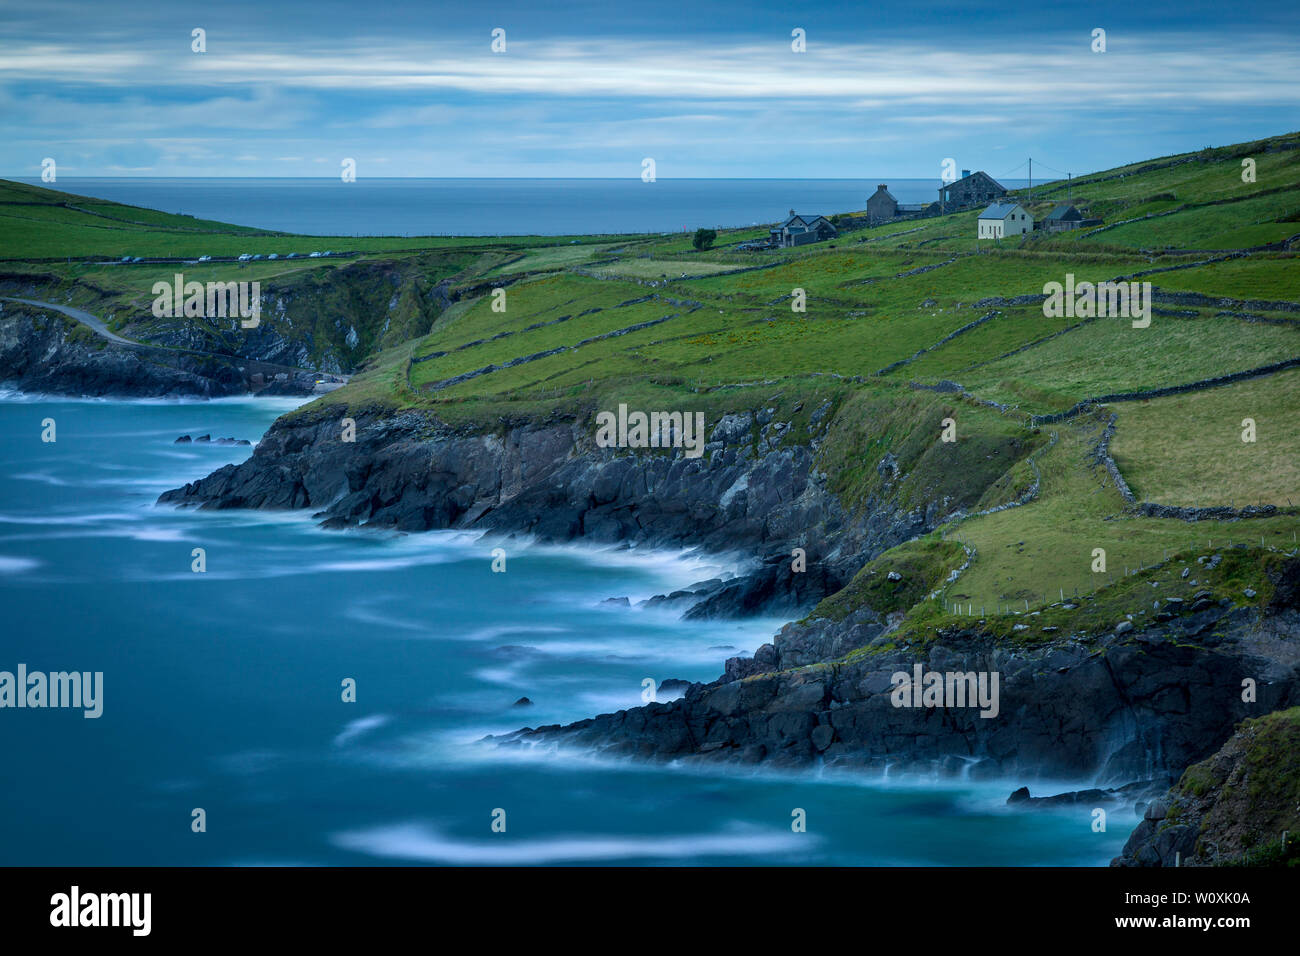 Evening over village of Coumeenoole along the coastline of the Dingle Peninsula, County Kerry, Republic of Ireland Stock Photo